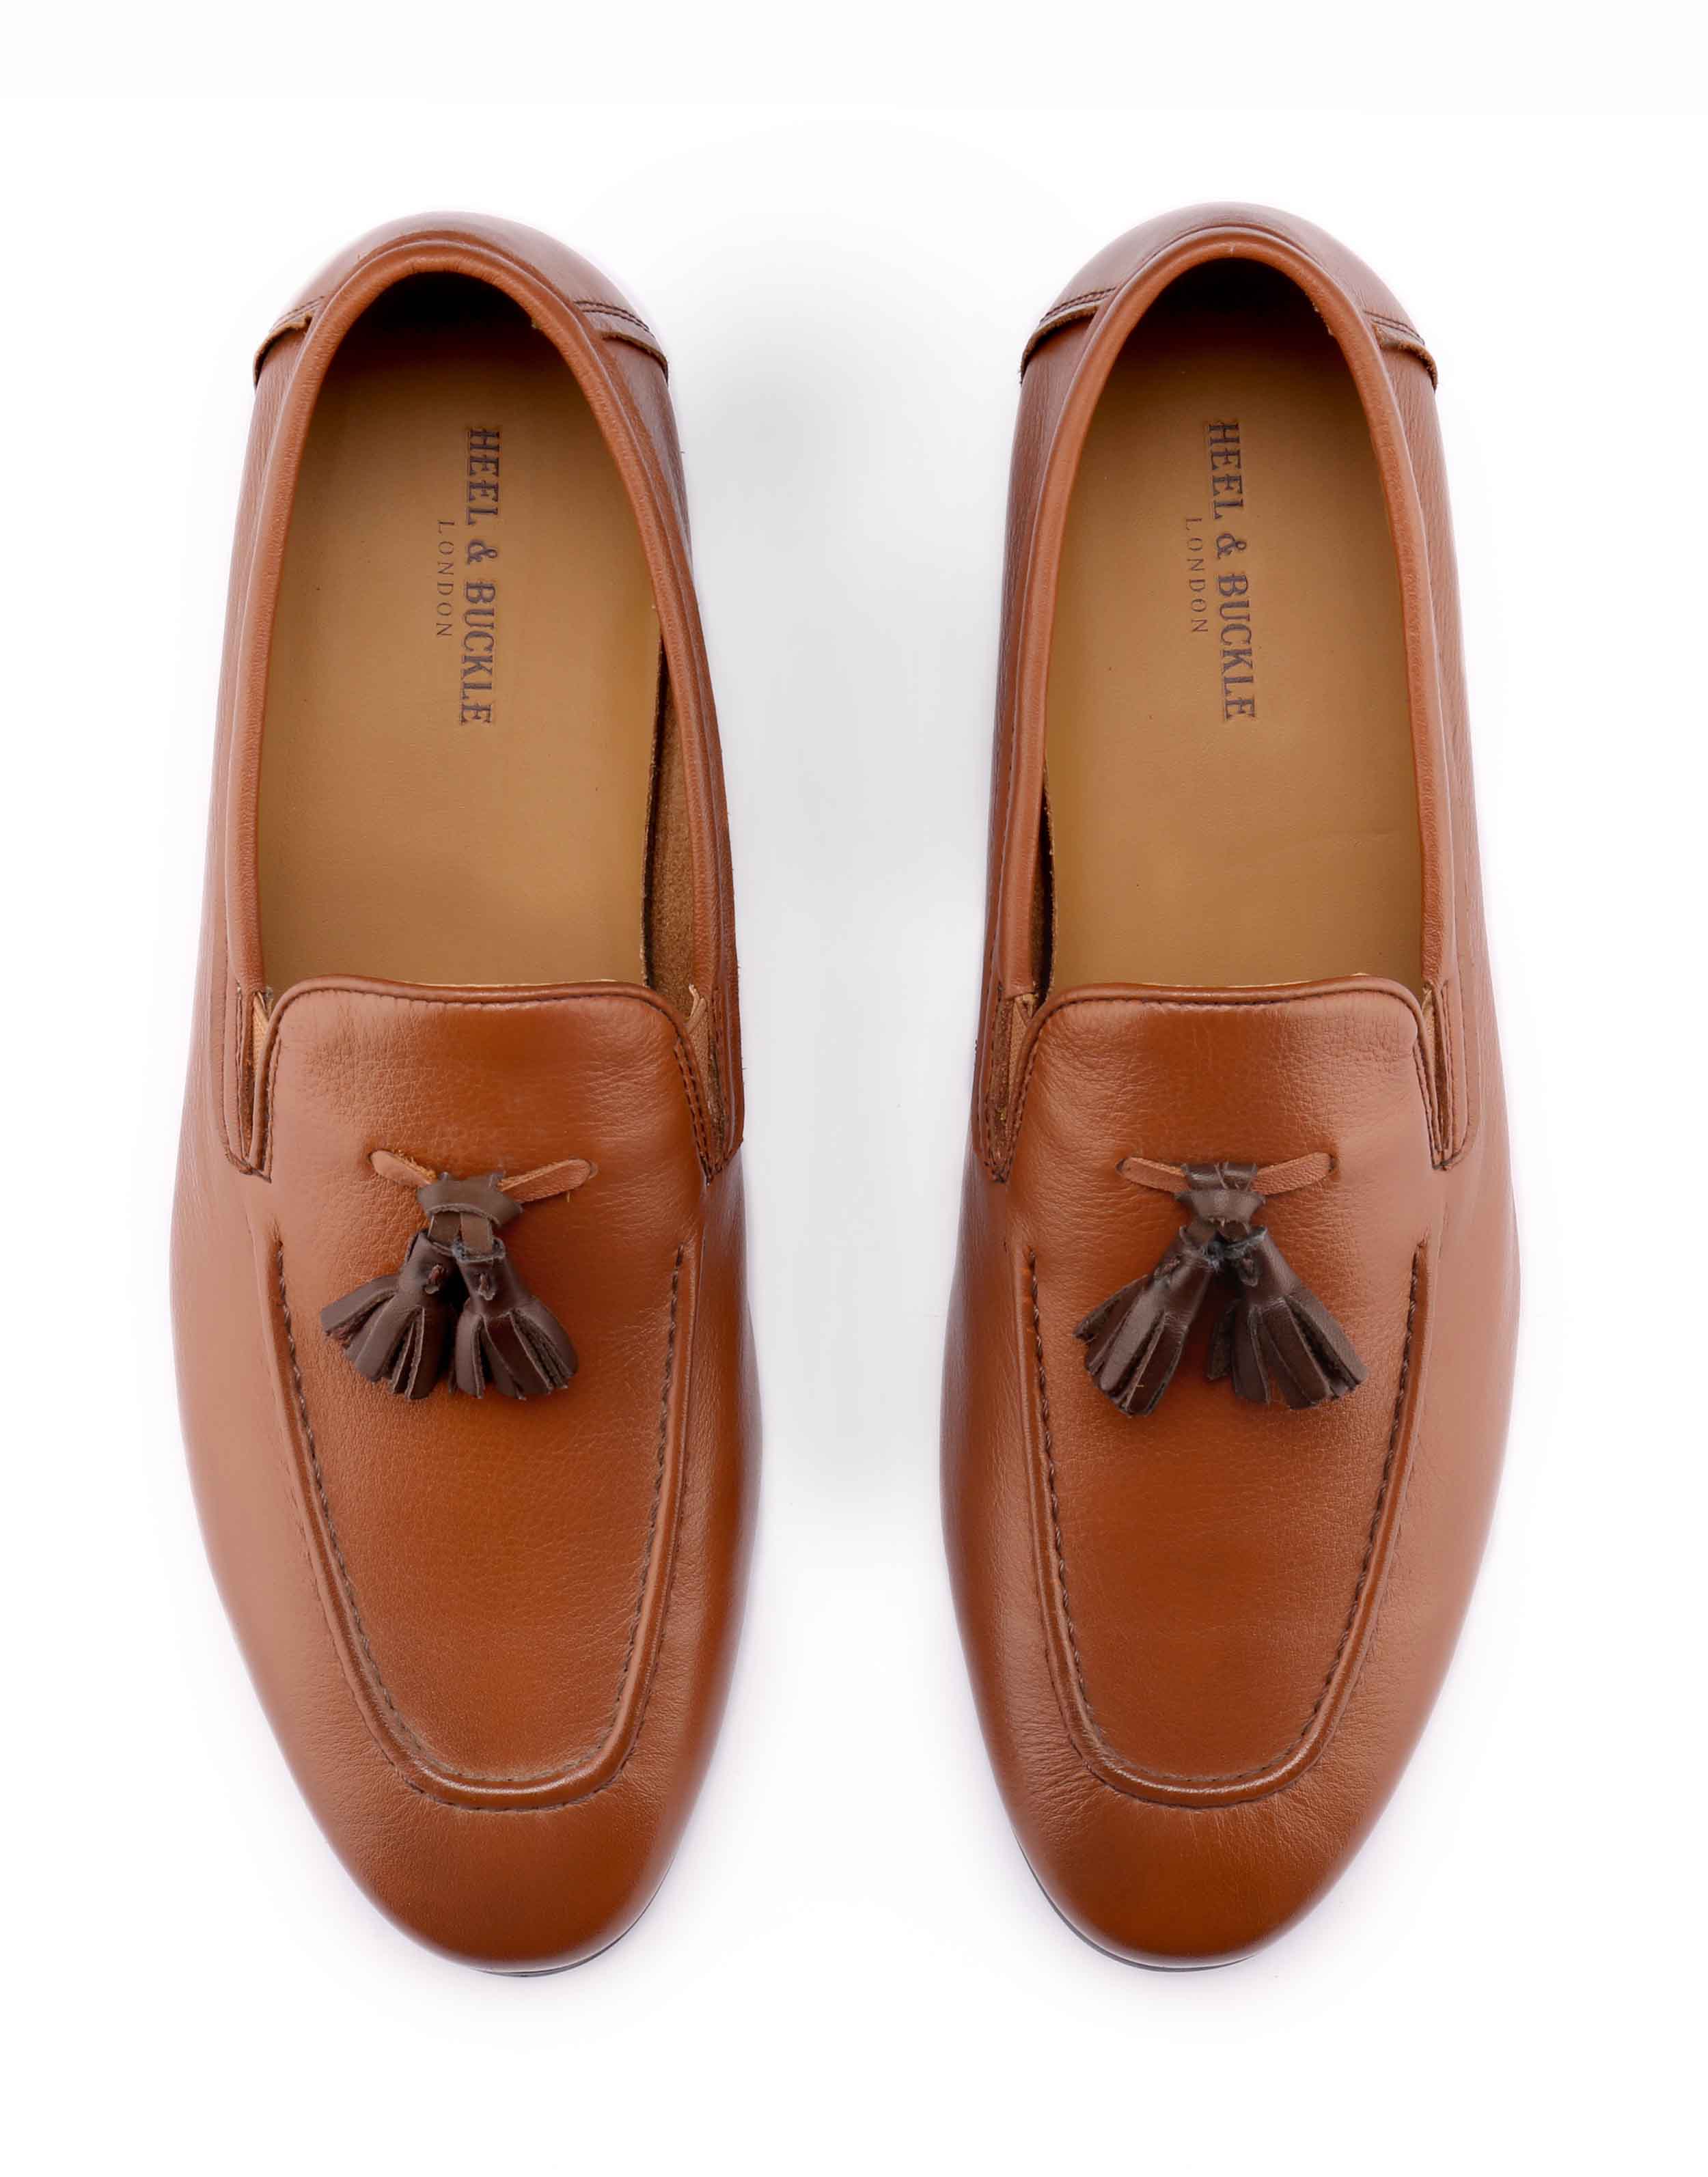 LORO PIANA Tasseled suede collapsible-heel loafers | NET-A-PORTER